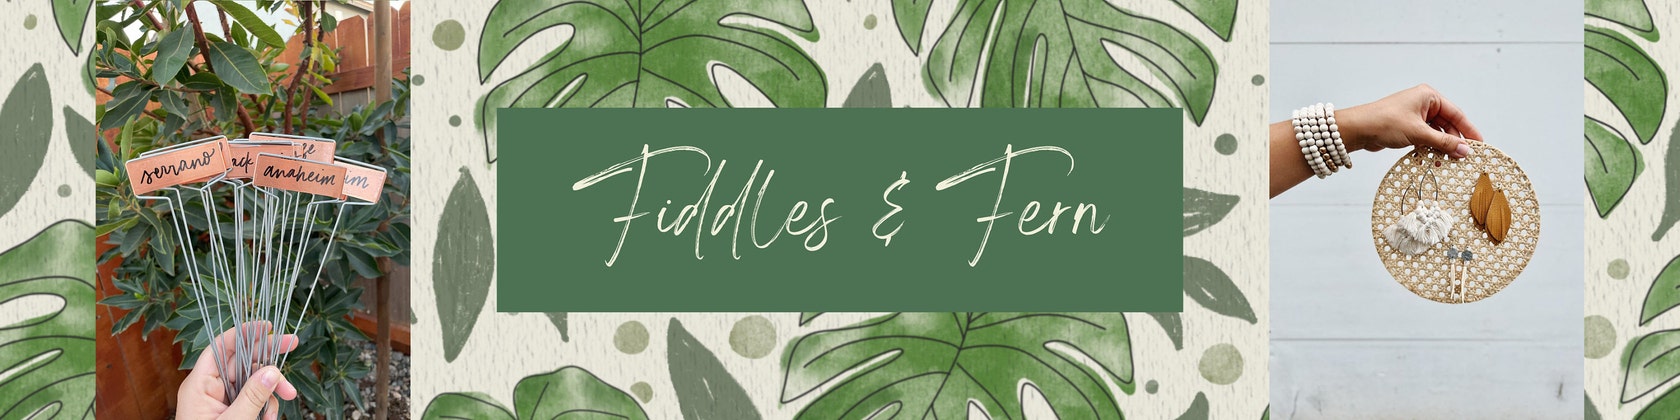 Top Selling Print-on-Demand Products in 2023 - Fiddles and Fern